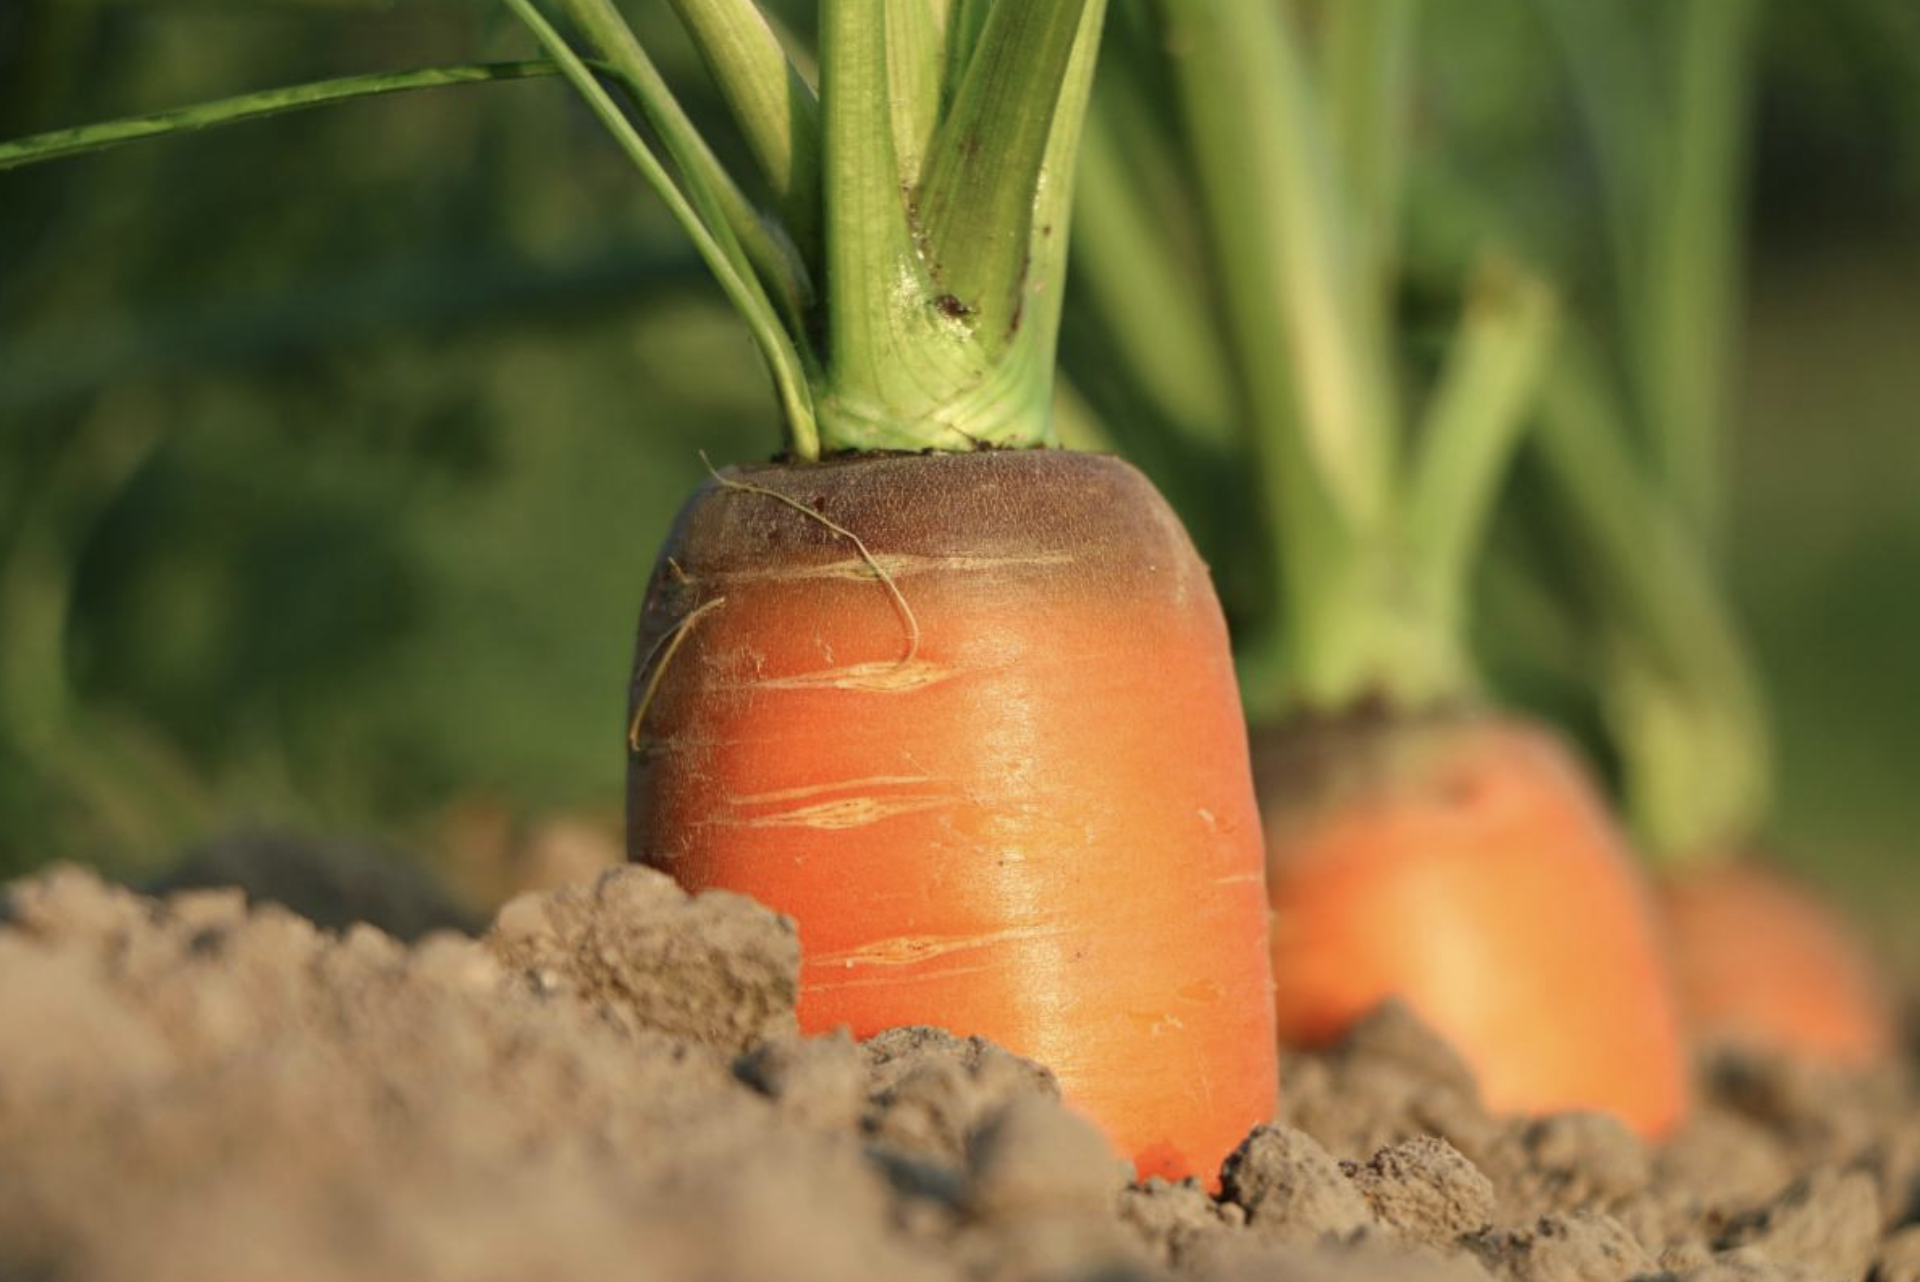 Orange carrots popping out of the soil they are growing in